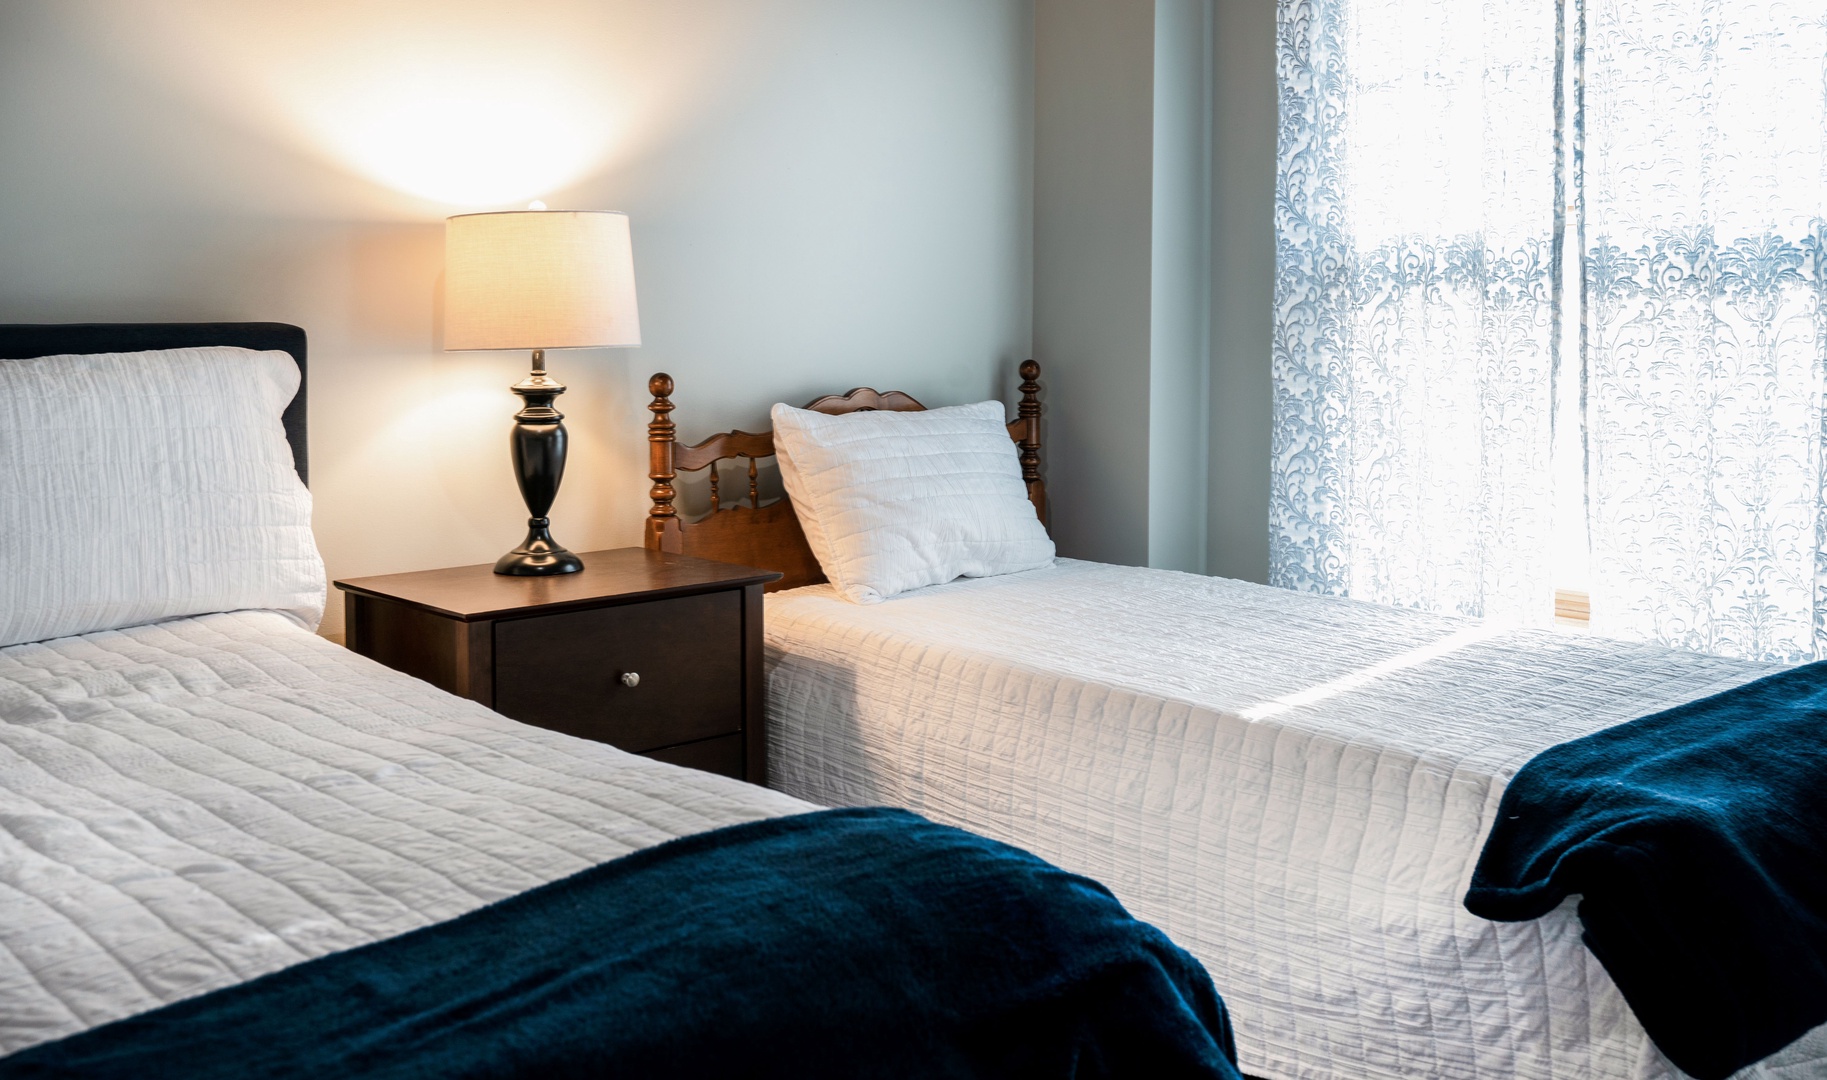 The lower-level bedroom offers a full-sized & twin-sized bed